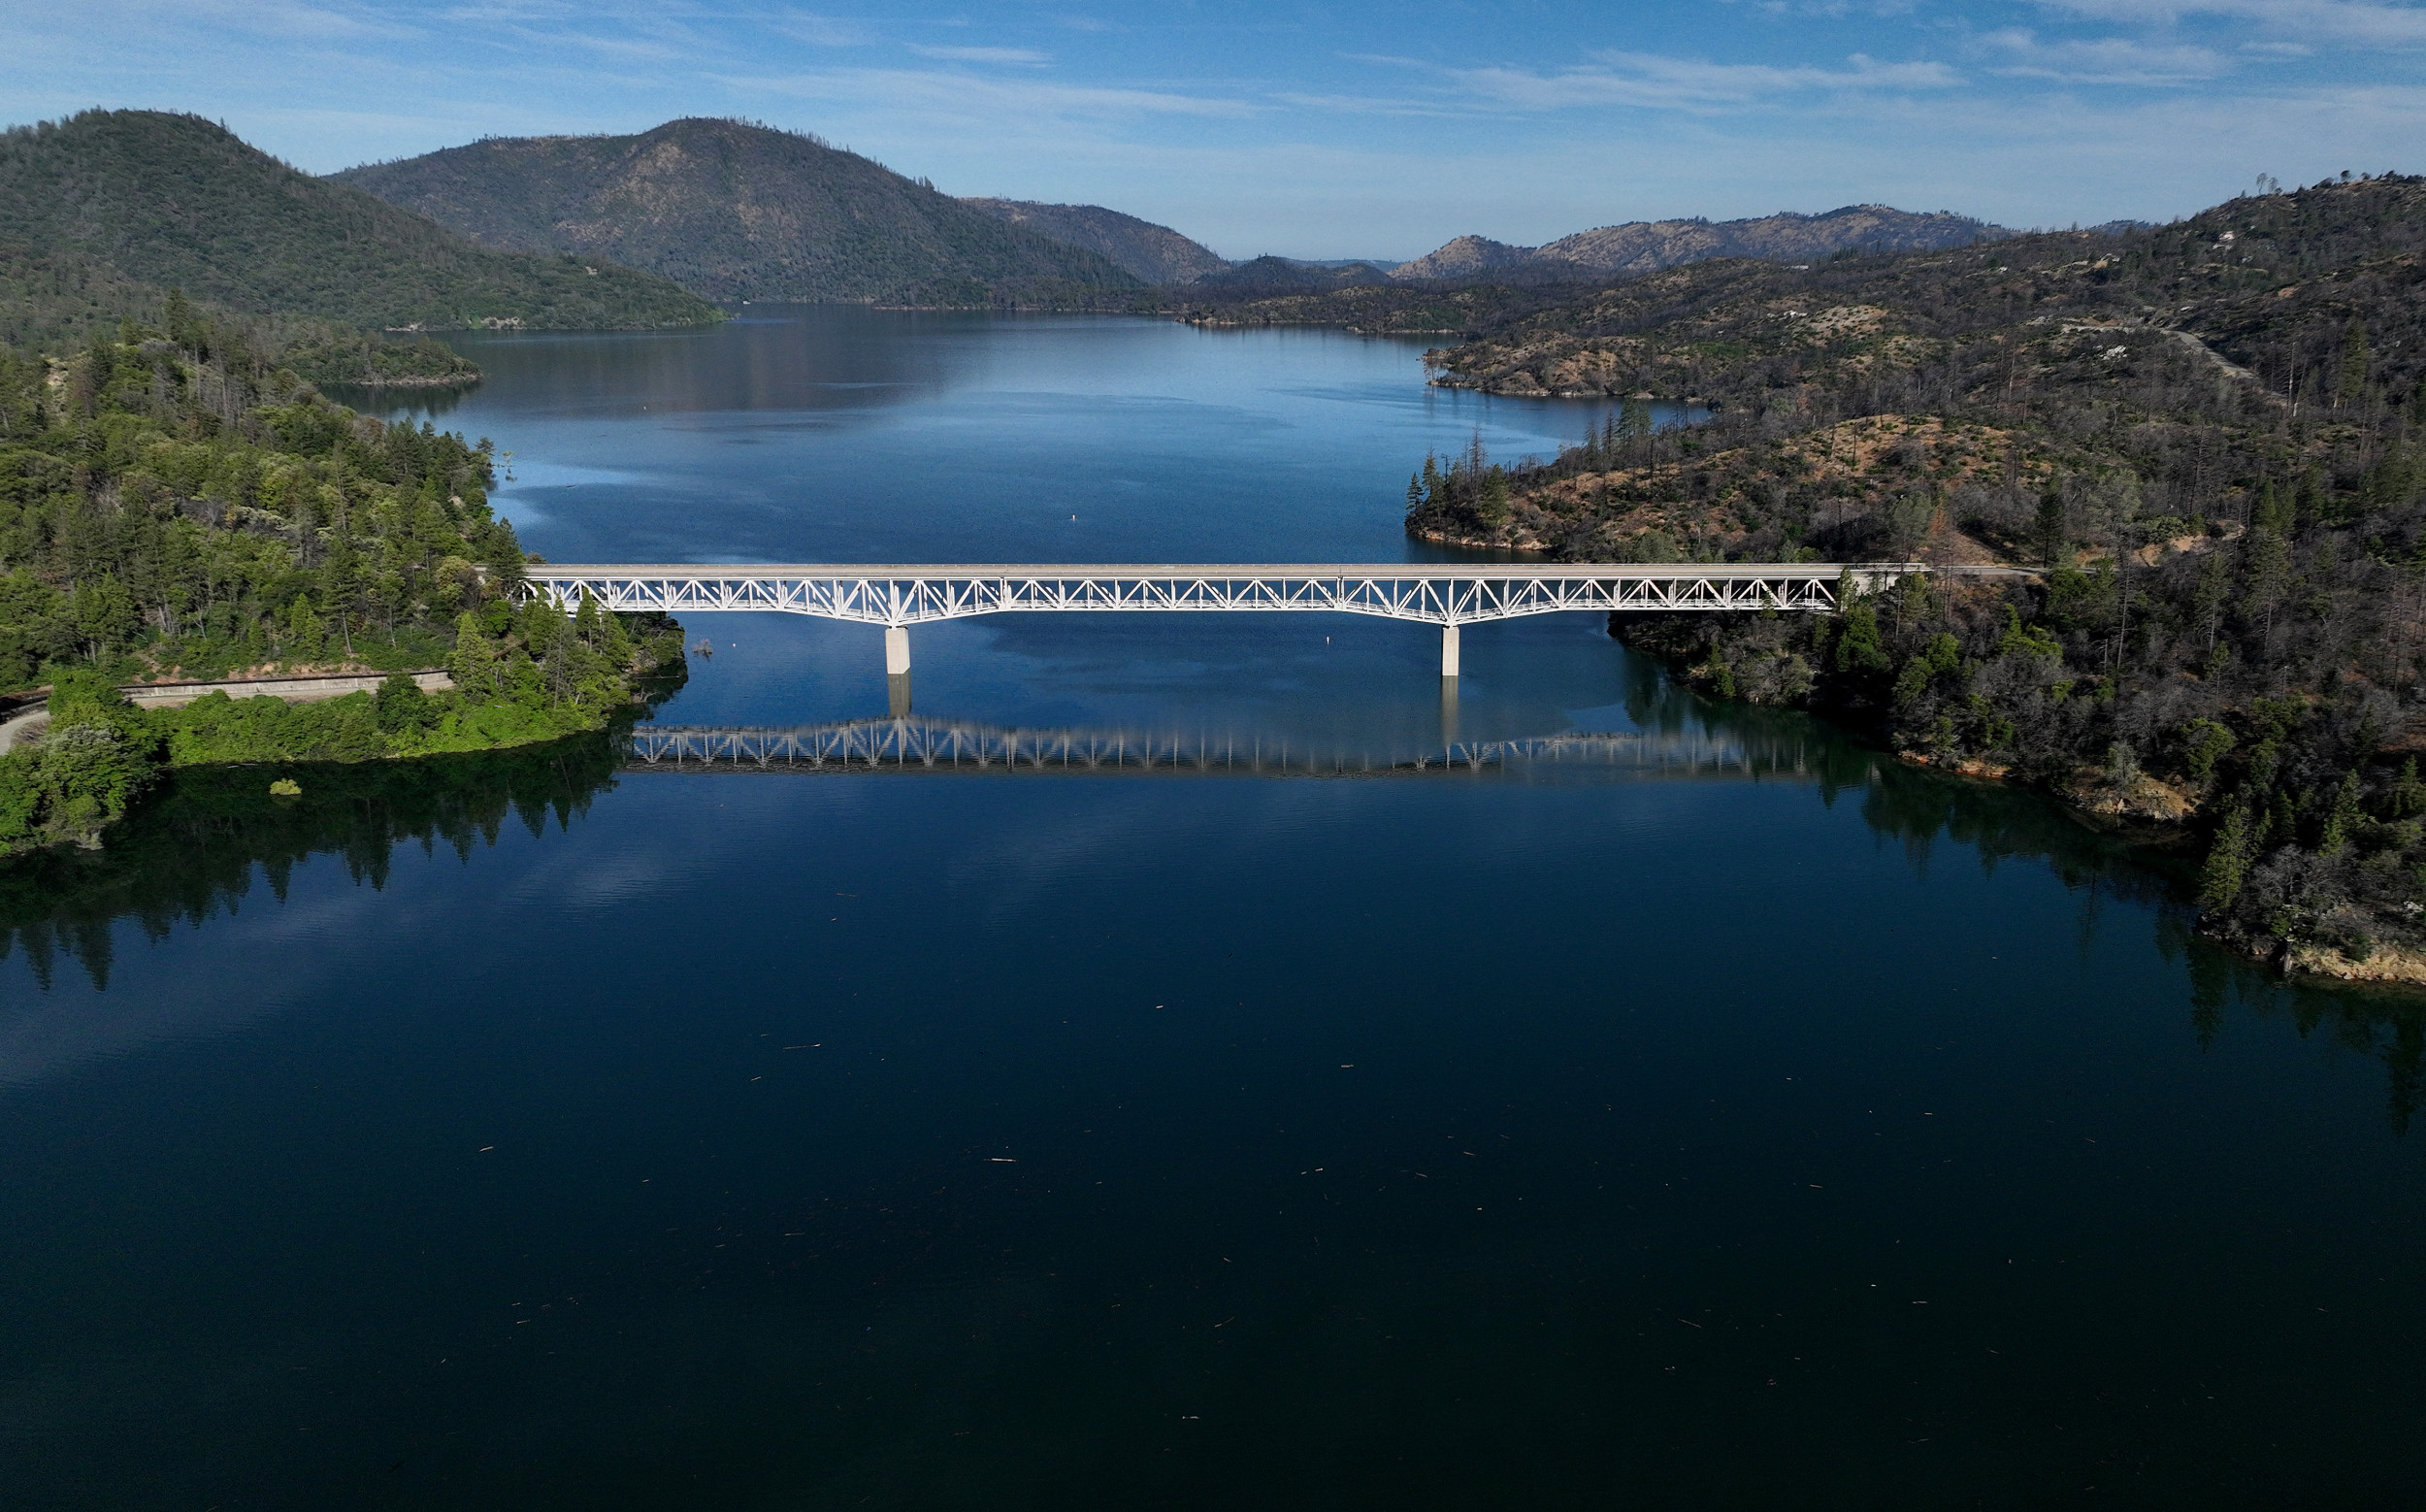 California’s second largest reservoir is shrinking